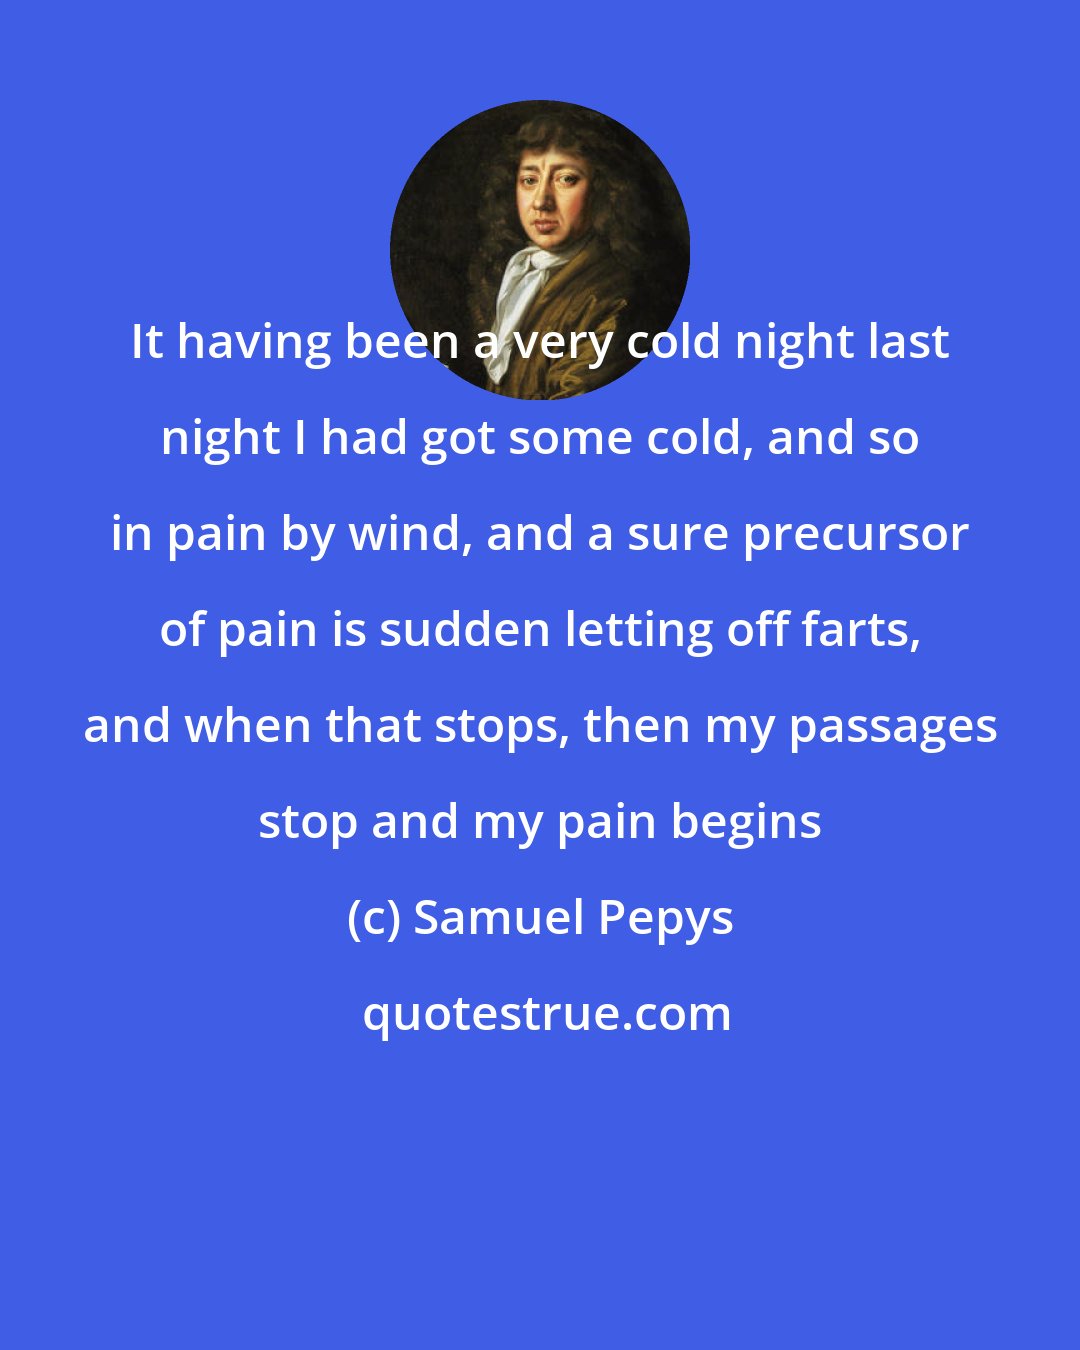 Samuel Pepys: It having been a very cold night last night I had got some cold, and so in pain by wind, and a sure precursor of pain is sudden letting off farts, and when that stops, then my passages stop and my pain begins